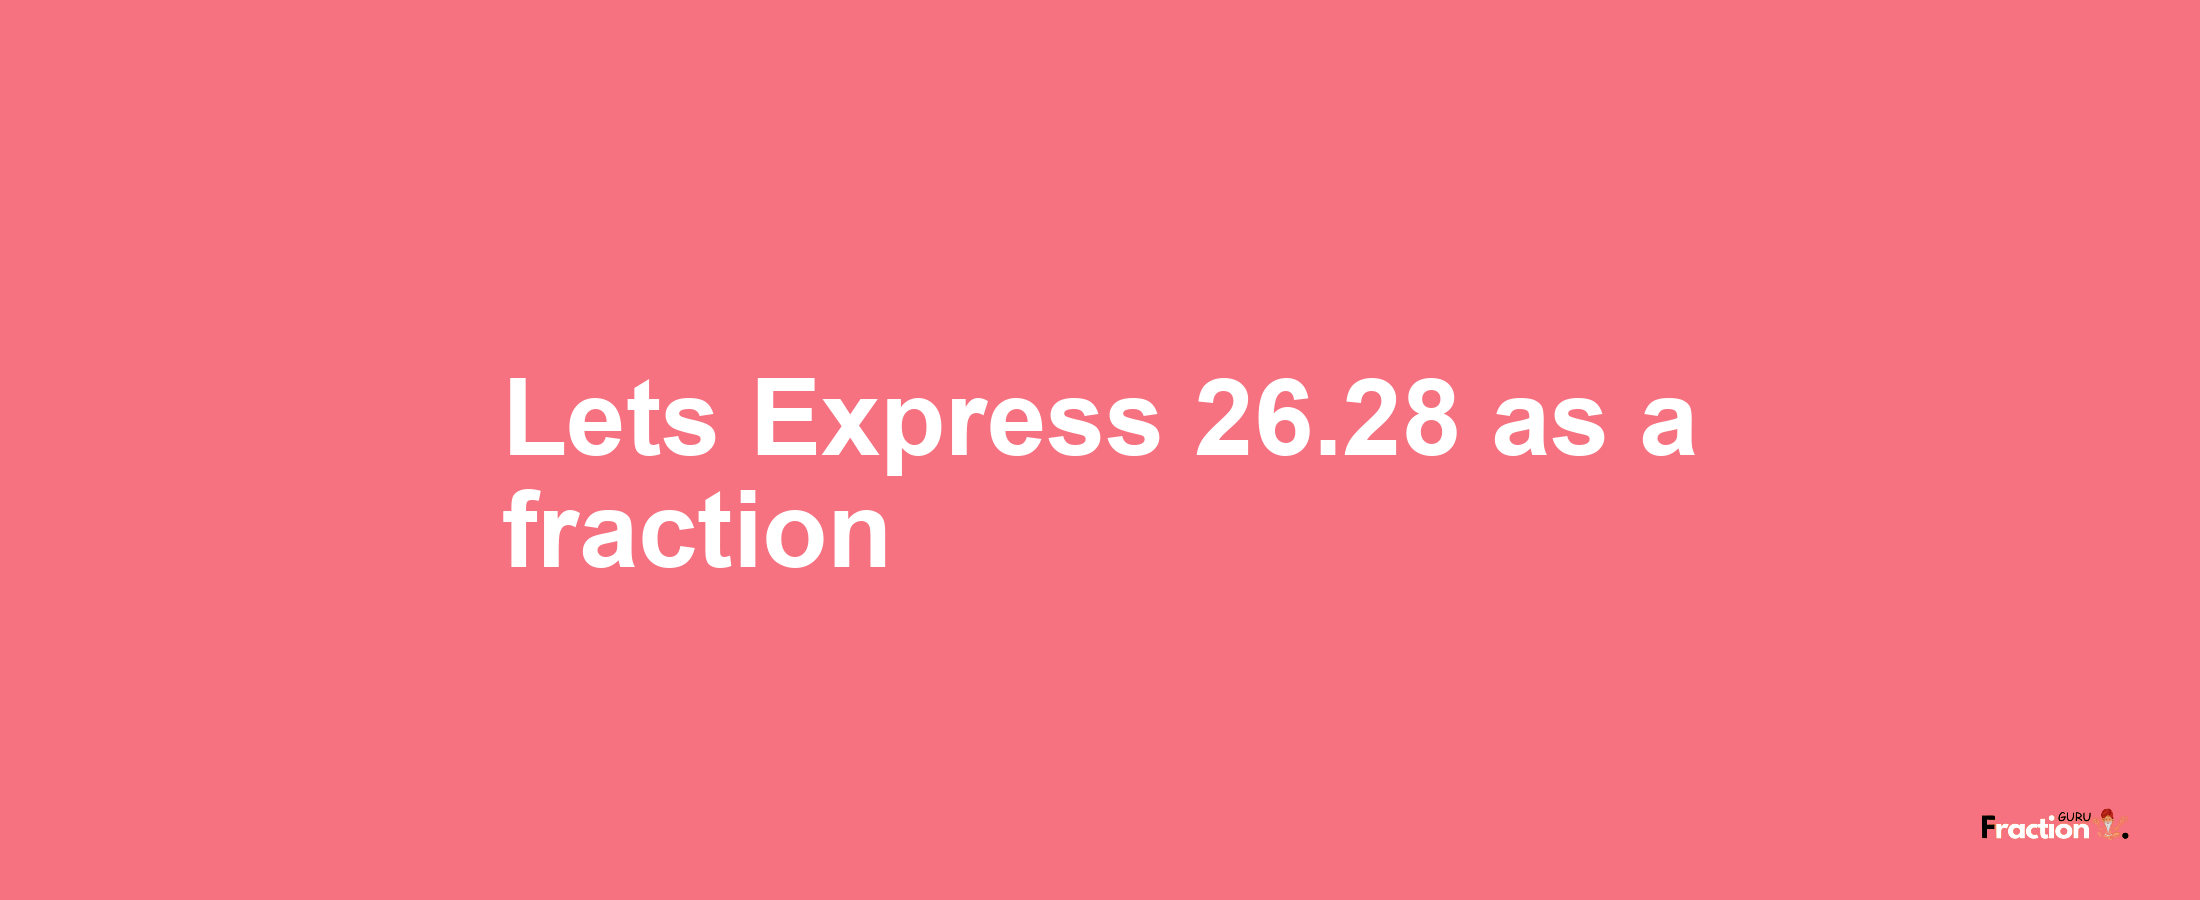 Lets Express 26.28 as afraction